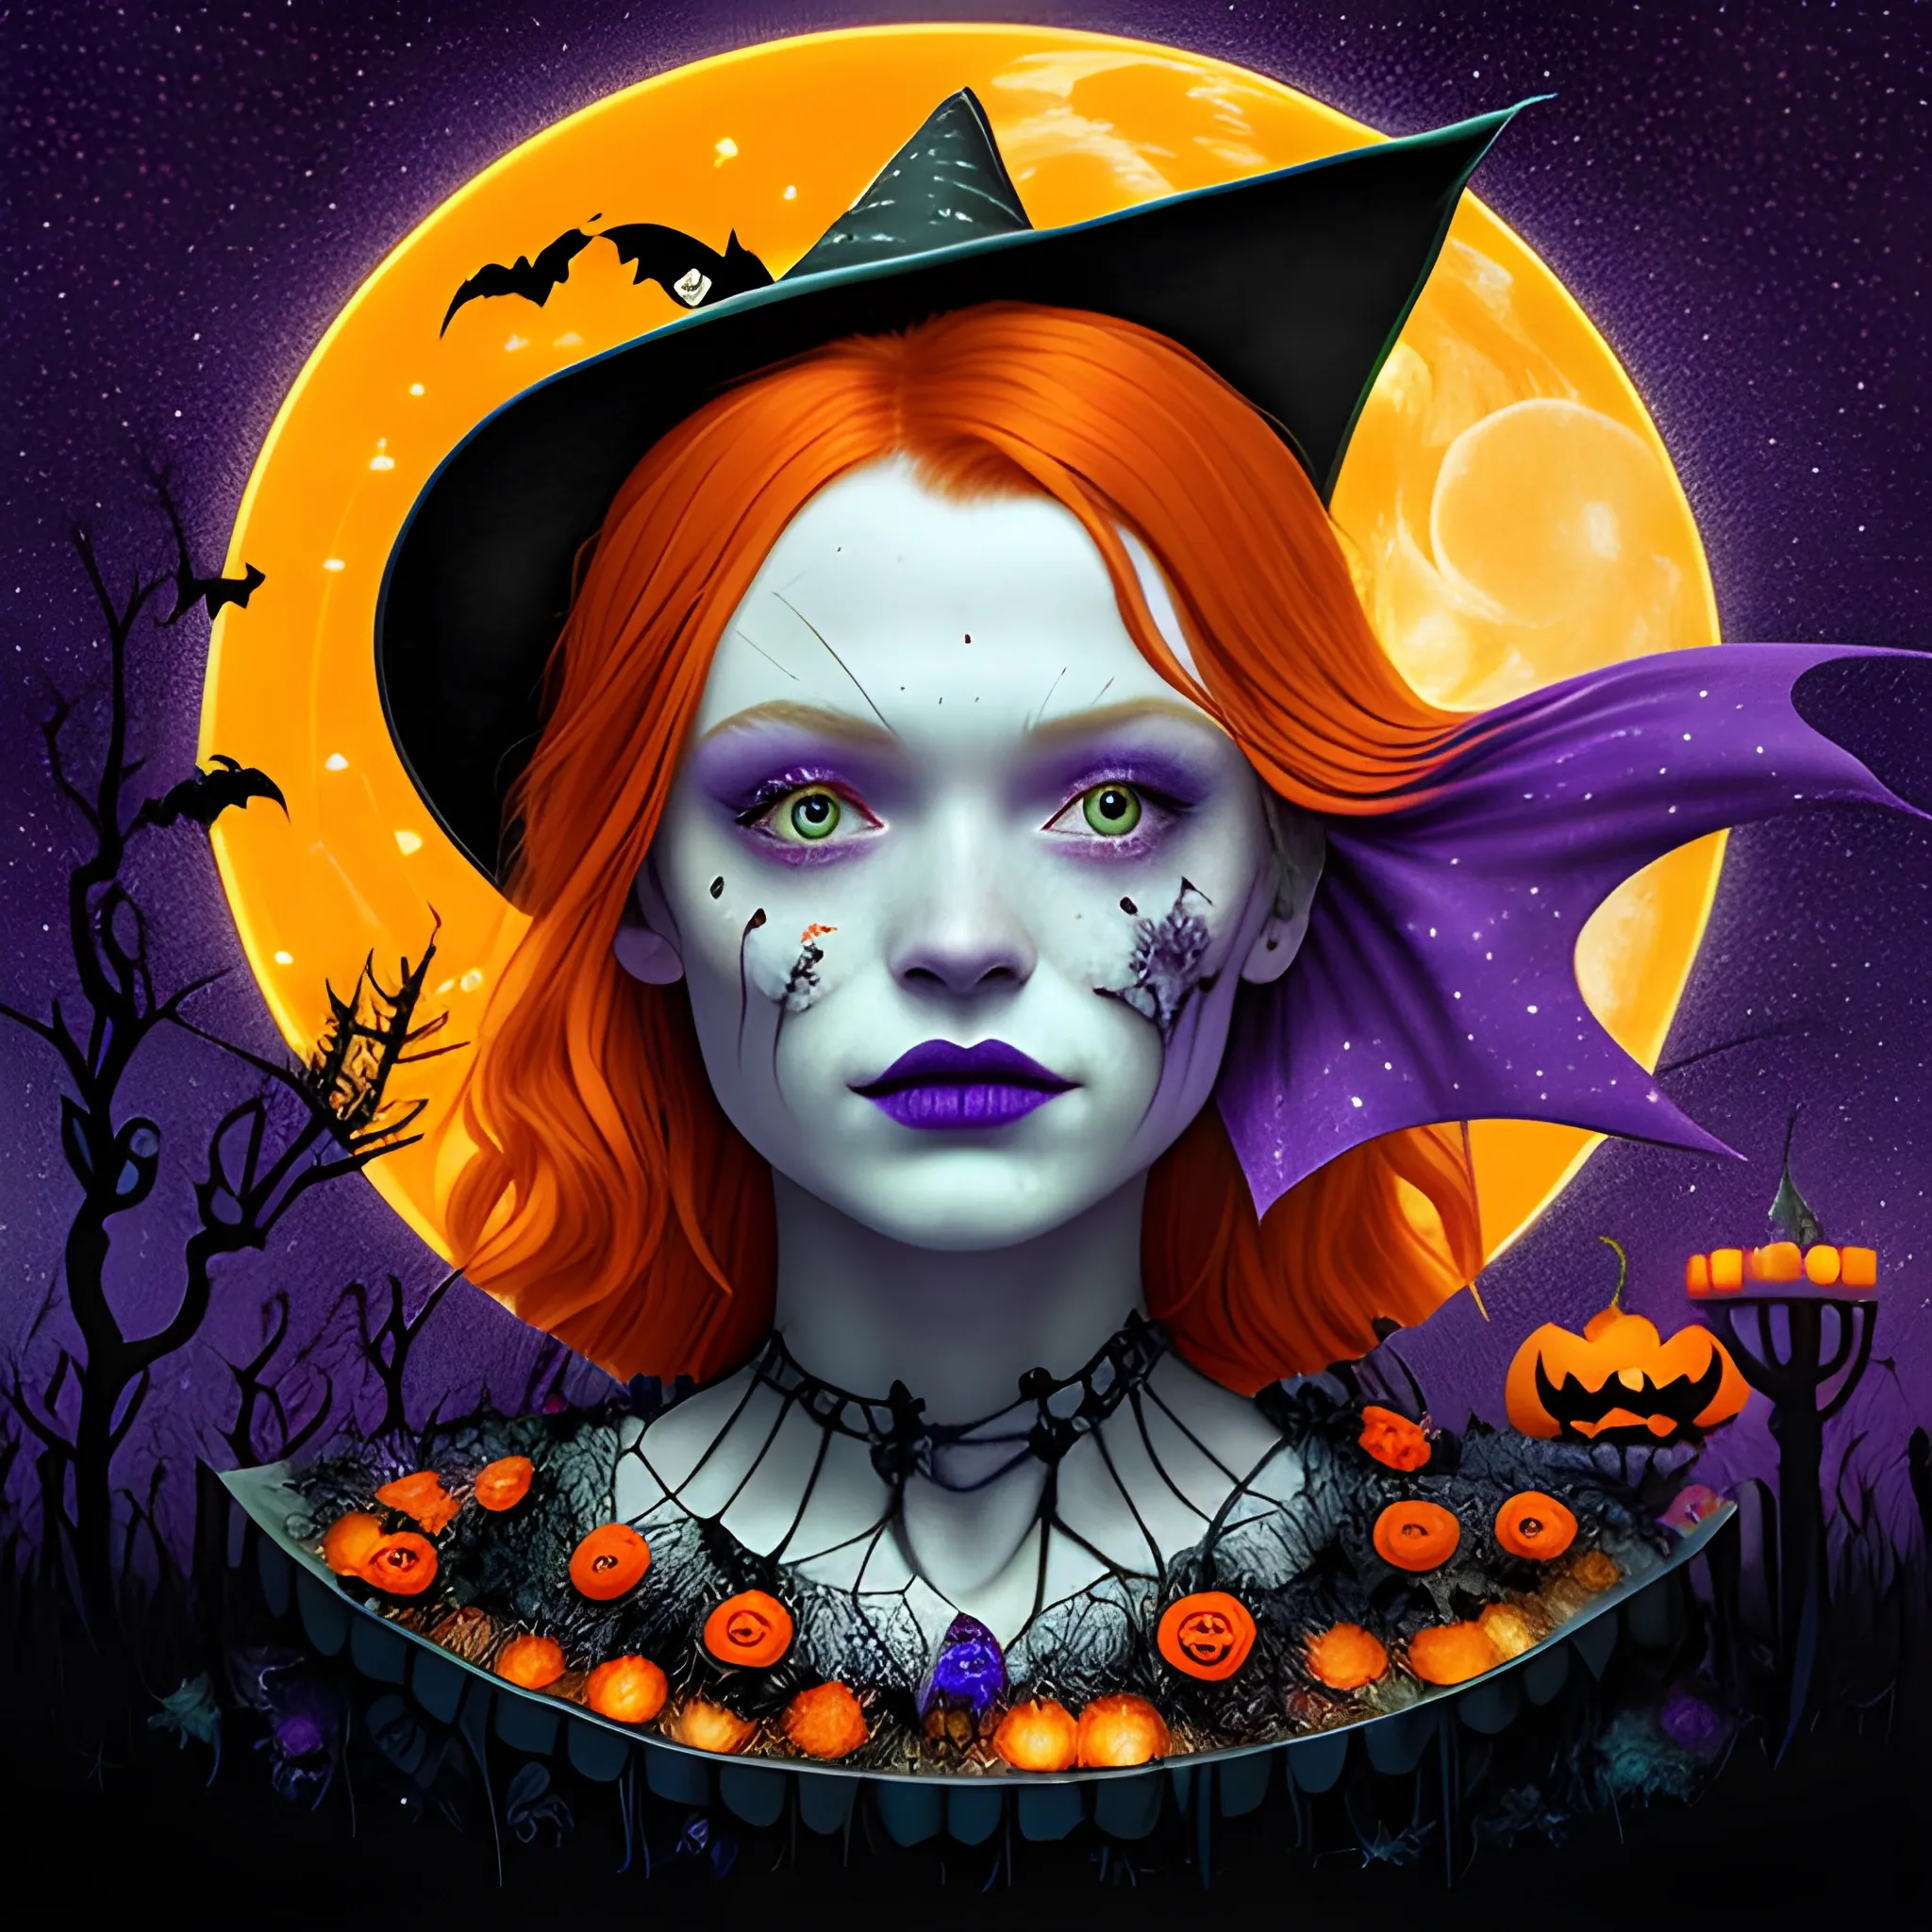 Bella Thorne / Sadie Sink face morph as a Halloween Witch, wearing a thorny witch hat adorned with thorns and black roses; Halloween, bats, full moon in a nebula sky, neon spray paint, acrylic paint, fantastical surrealist world, in the style of Stephen Gammell, extremely detailed, sick, gothic, eldritch, candles, neon grape purple, dayglo orange, chartreuse green, Halloween perfect purple pumpkins, green skulls, orange bats, magic, candles, cobweb, spider, glitter, luminous color sparkles, dayglo orange, neon grape purple, chartreuse green, hot pink, stars, sparkles, glitter, lanterns, gourds, Halloween; Goddess of the Night with a crescent moon and many stars in the style of Maxfield Parrish, starry night, James R. Eads, 3D